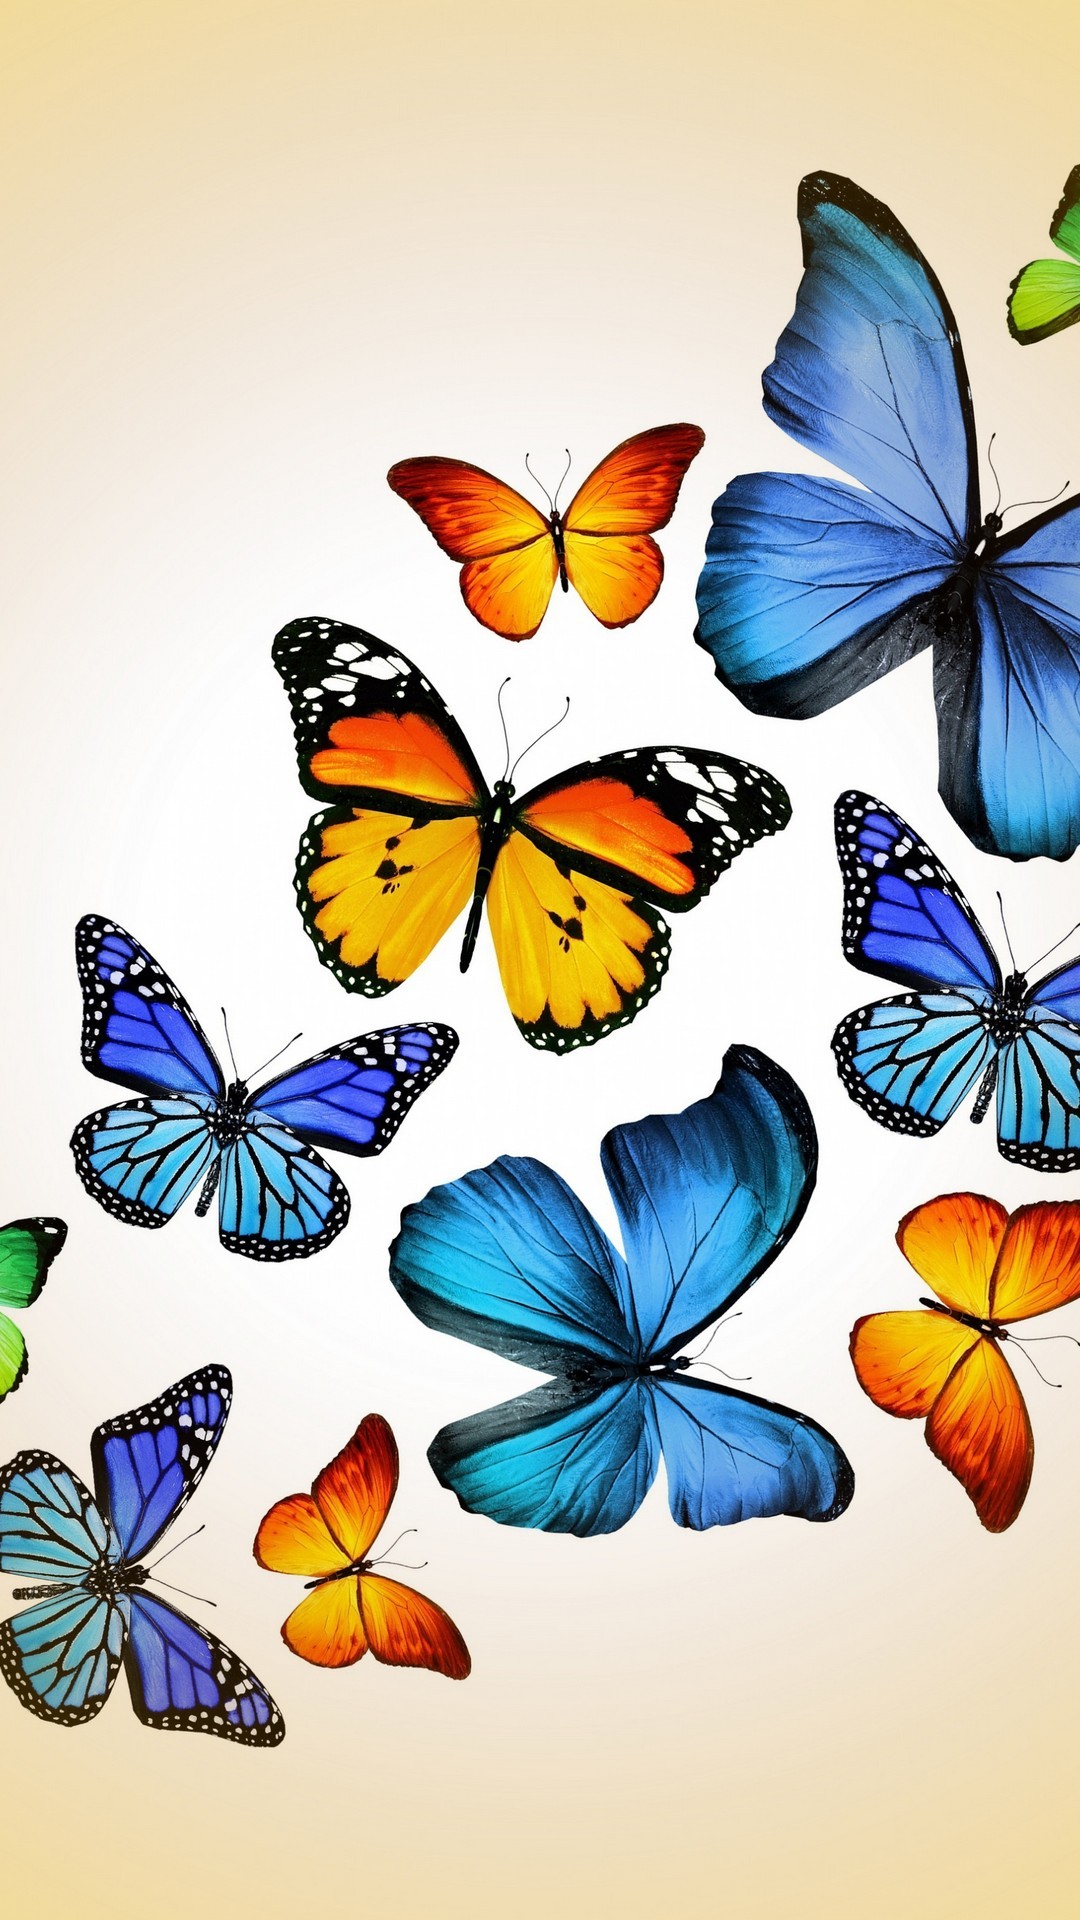 Cute Butterfly Android Wallpaper Android Wallpapers